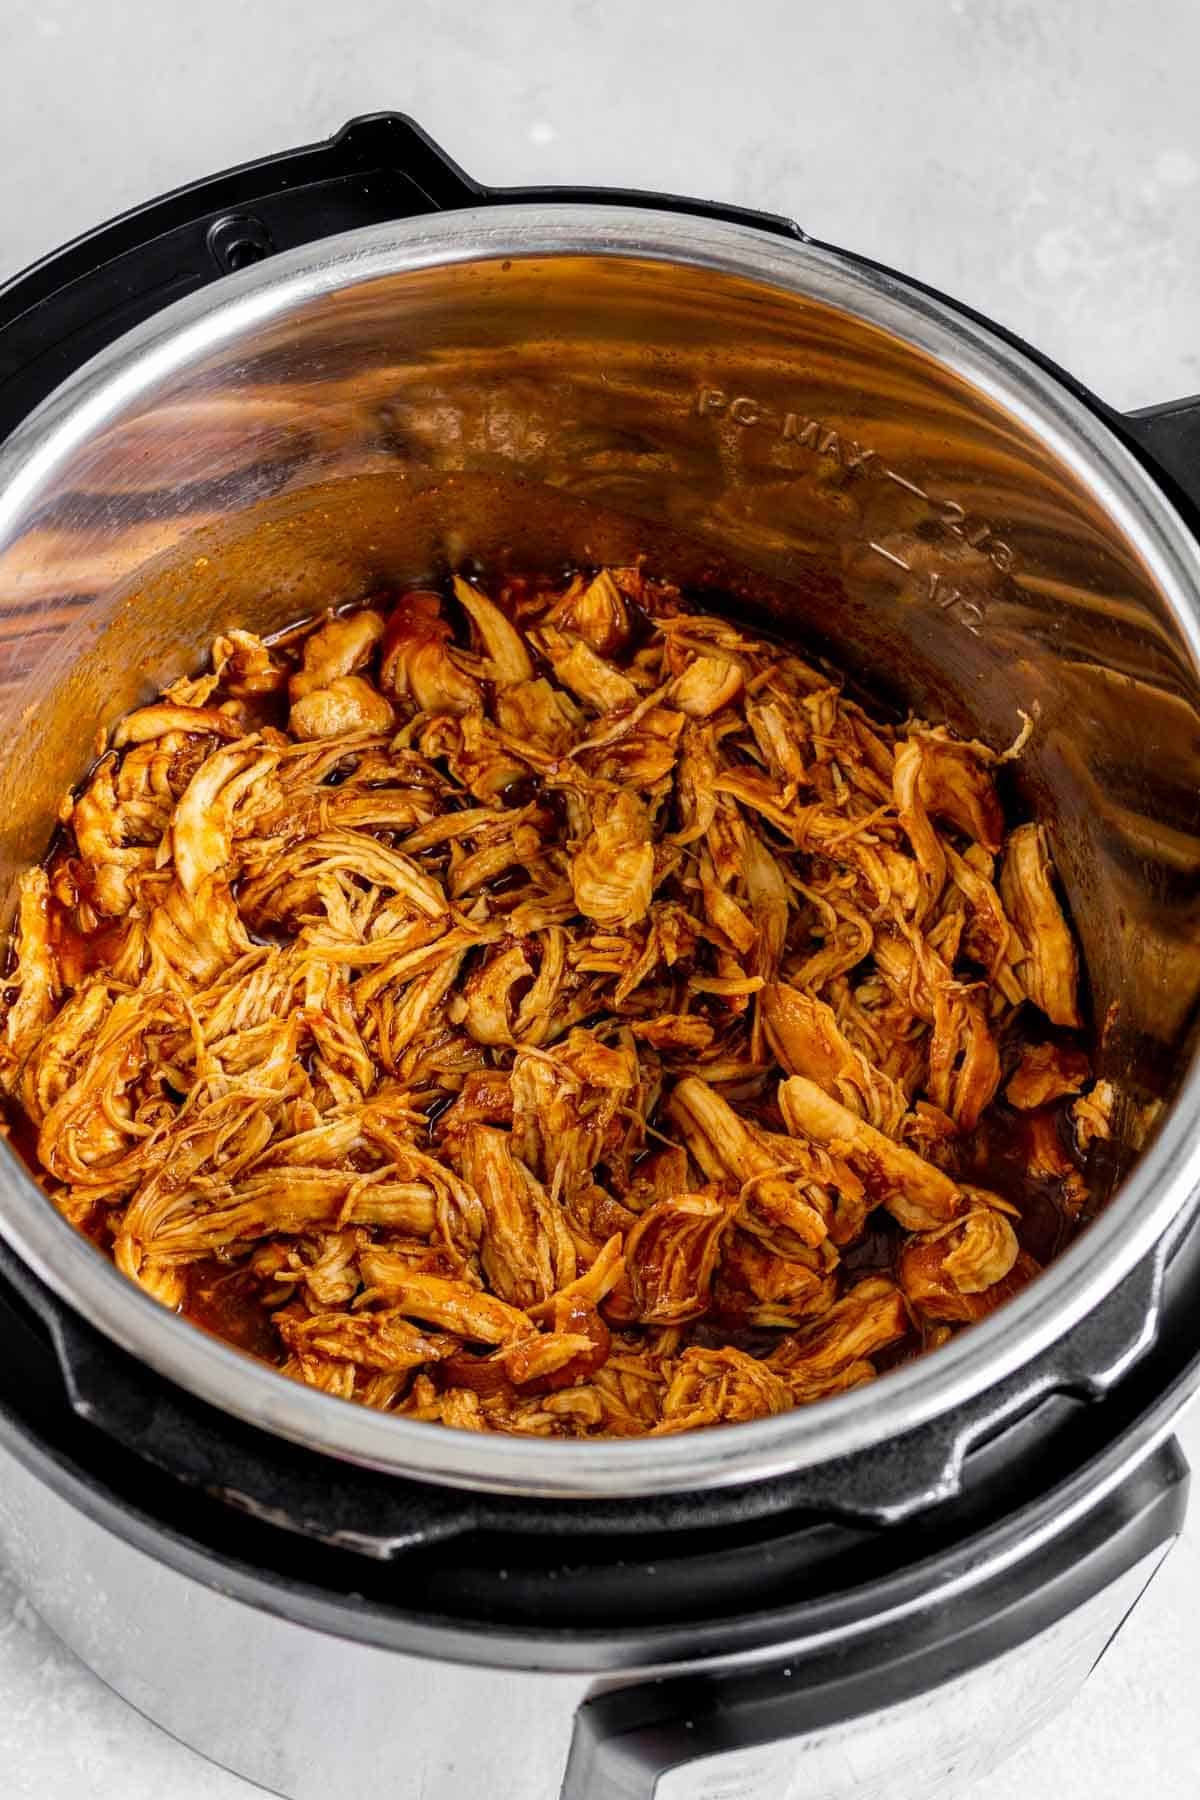 Shredded instant pot bbq chicken in the pressure cooker.